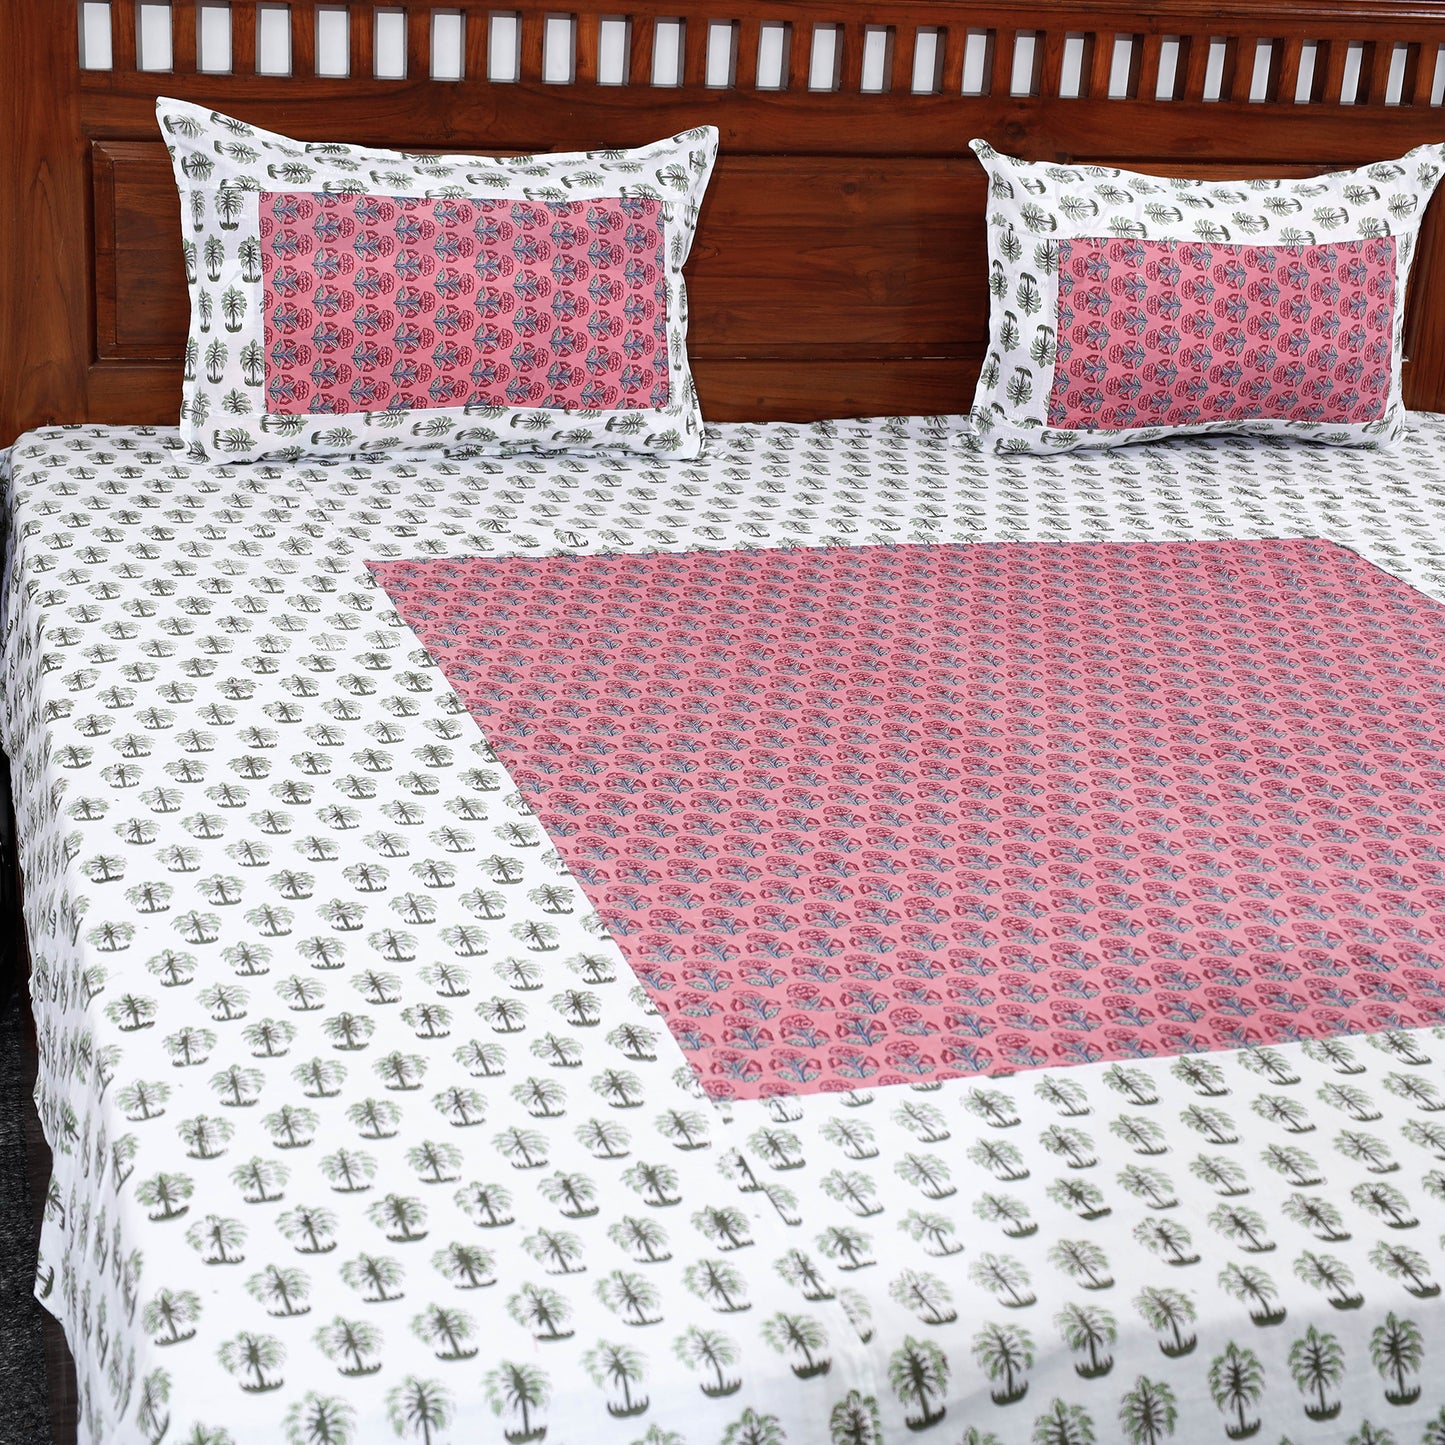 White - Sanganeri Block Printed Patchwork Cotton Bed Cover With Pillow Cover  (108 x 90 in)